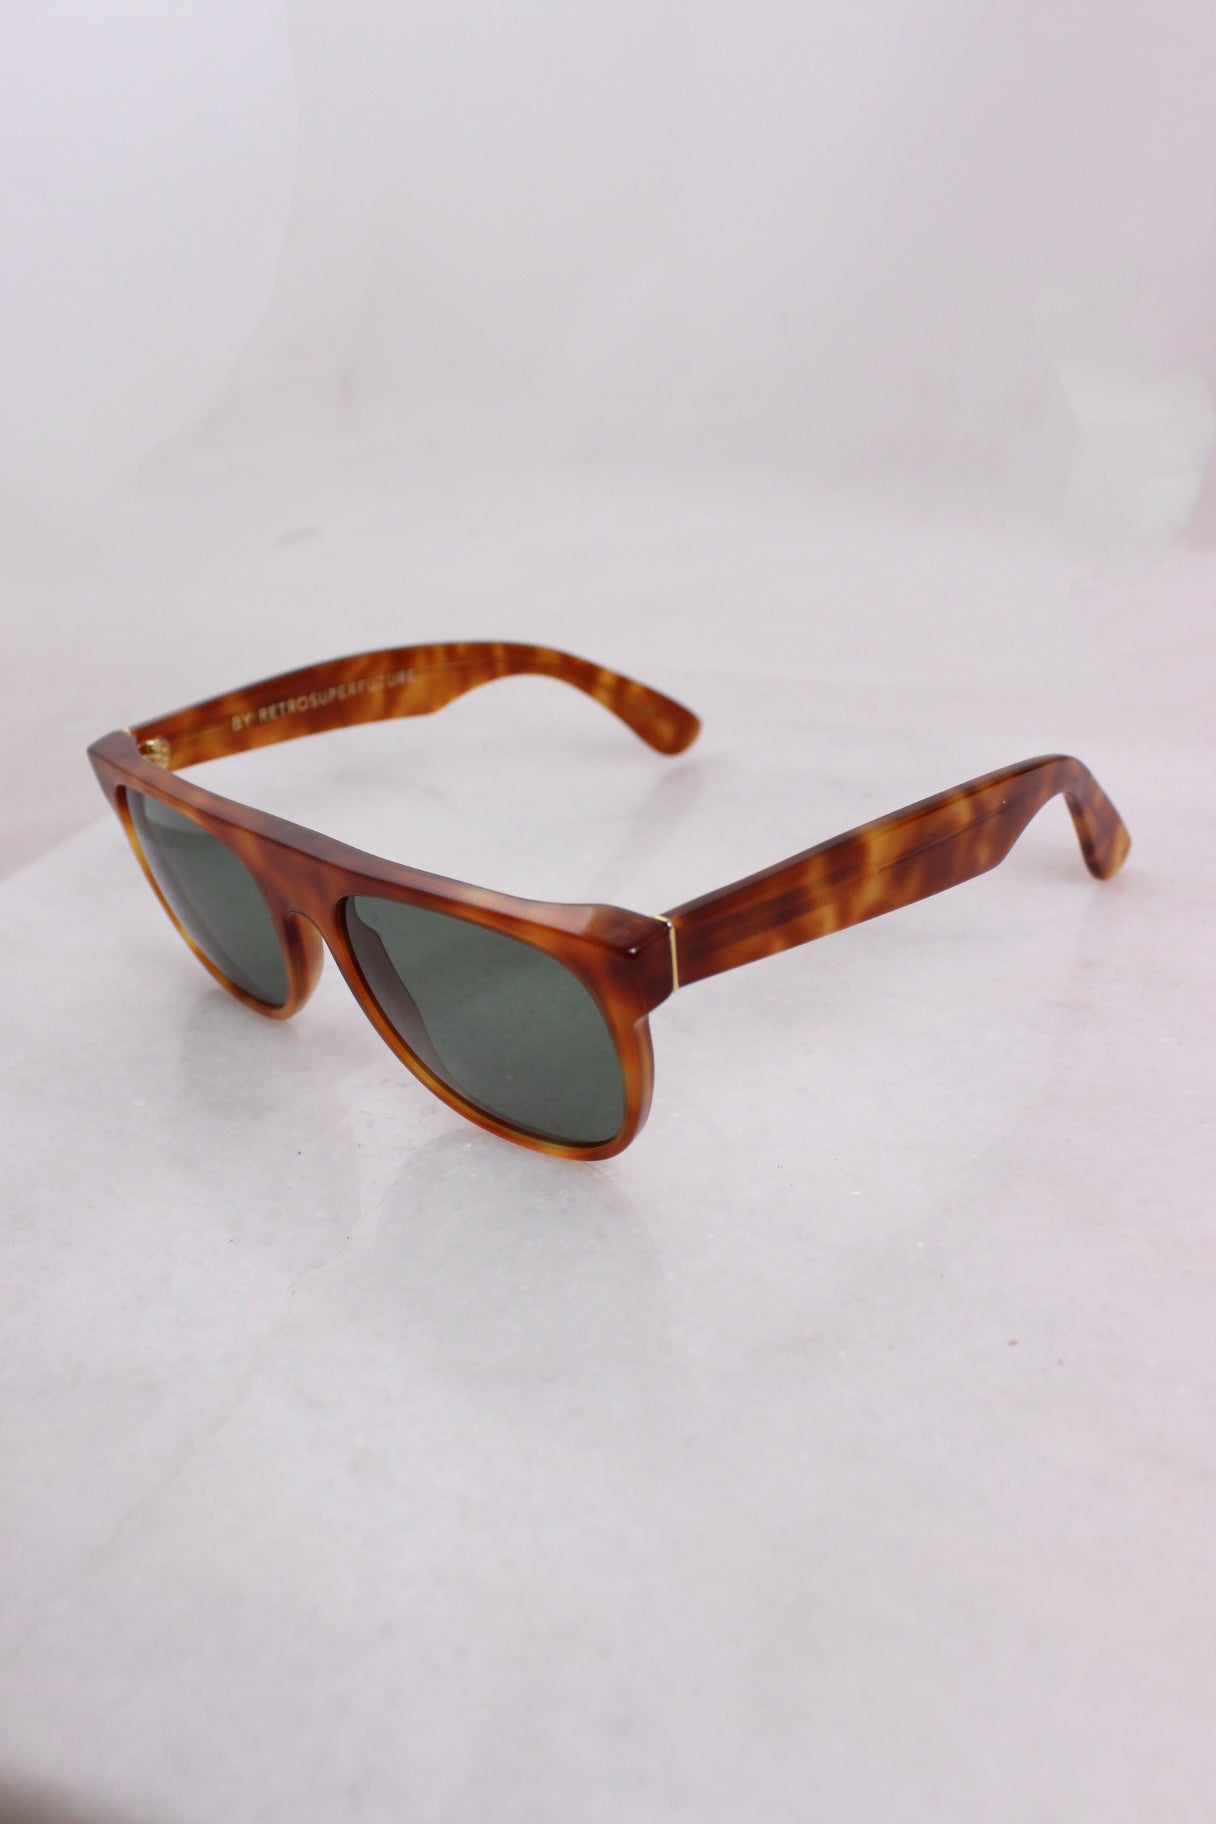 ¾ angled top profile of brown toned sunglasses with black tinted lenses and metallic gold toned hardware